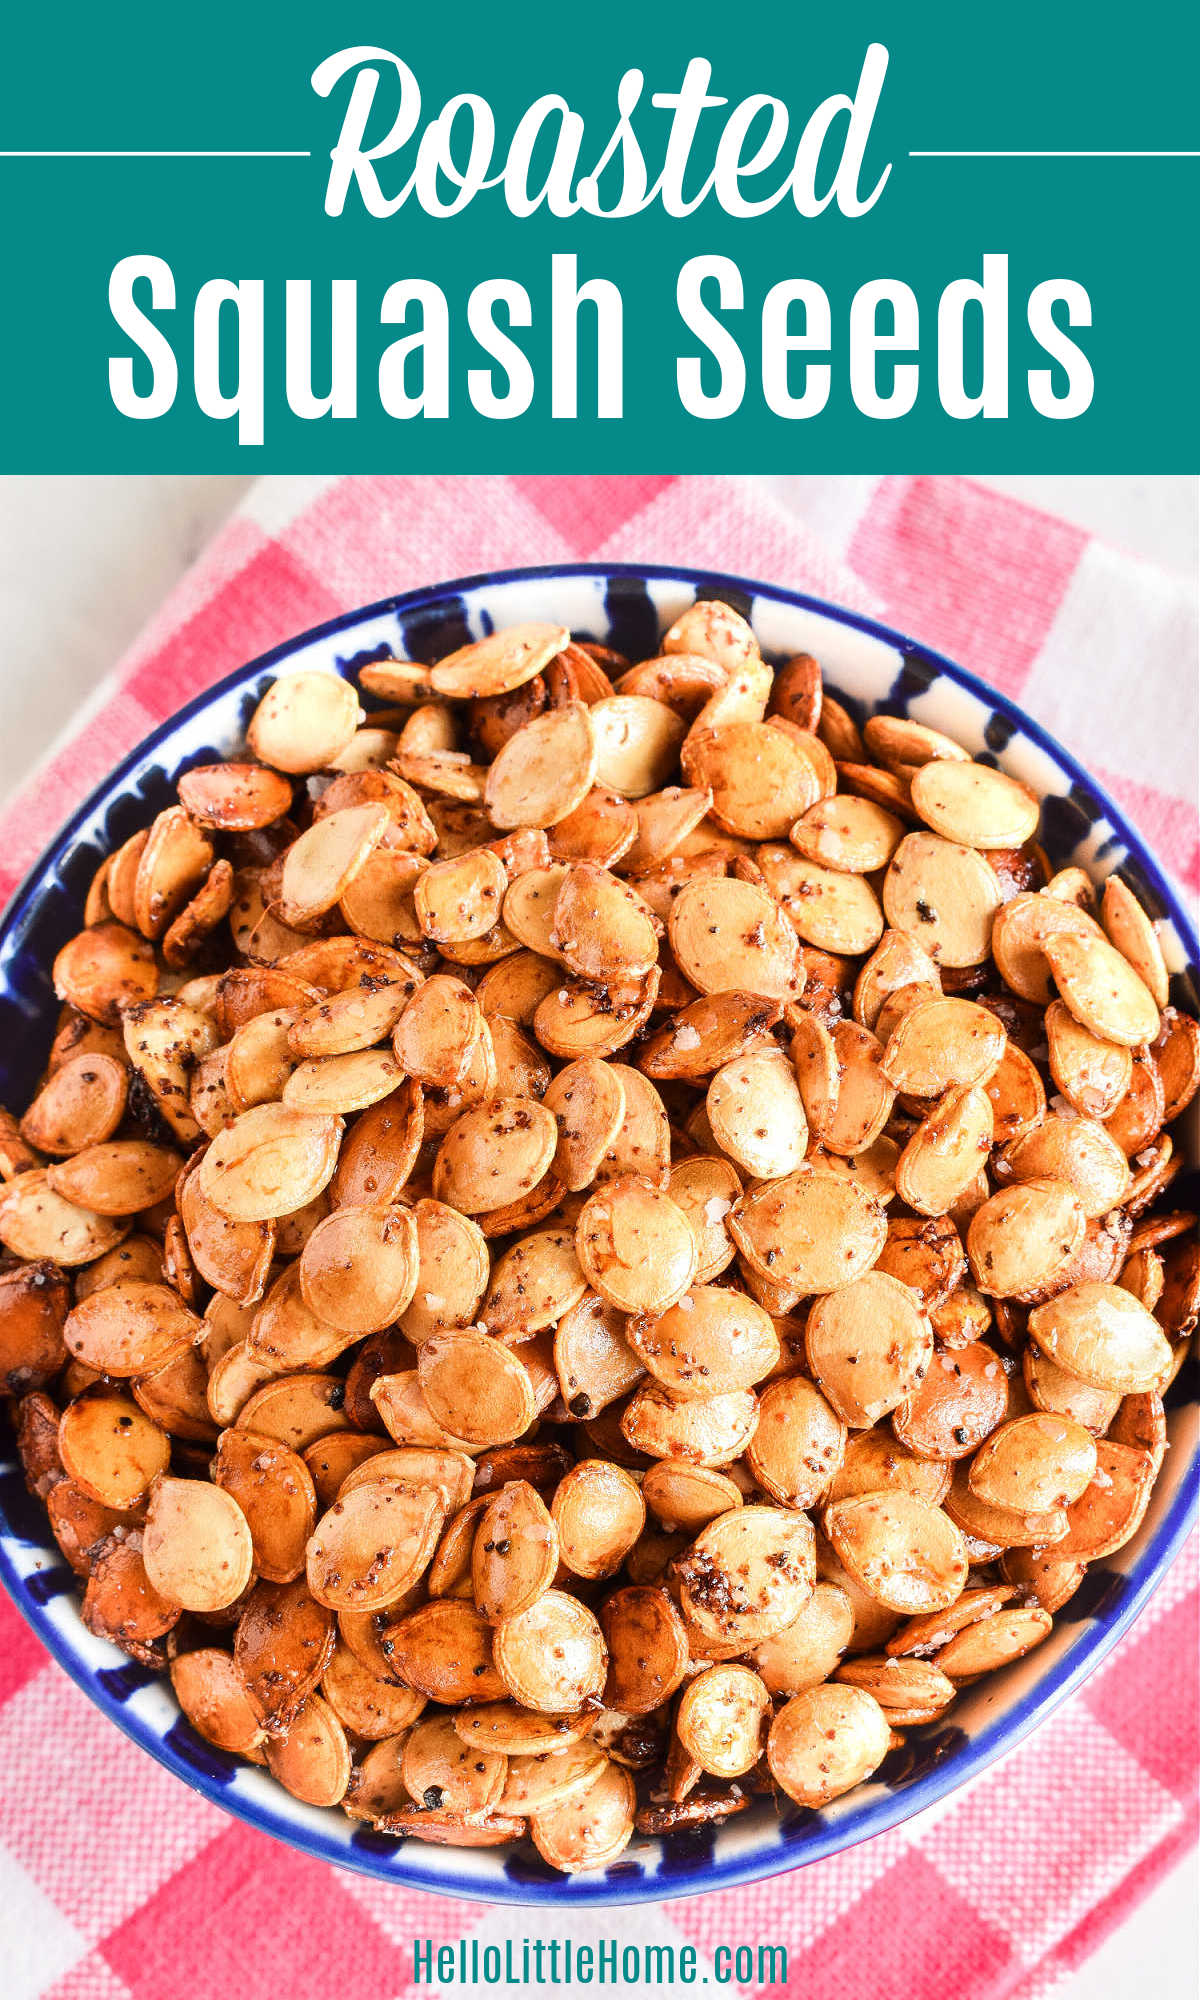 Closeup of a bowl of Roasted Squash Seeds.